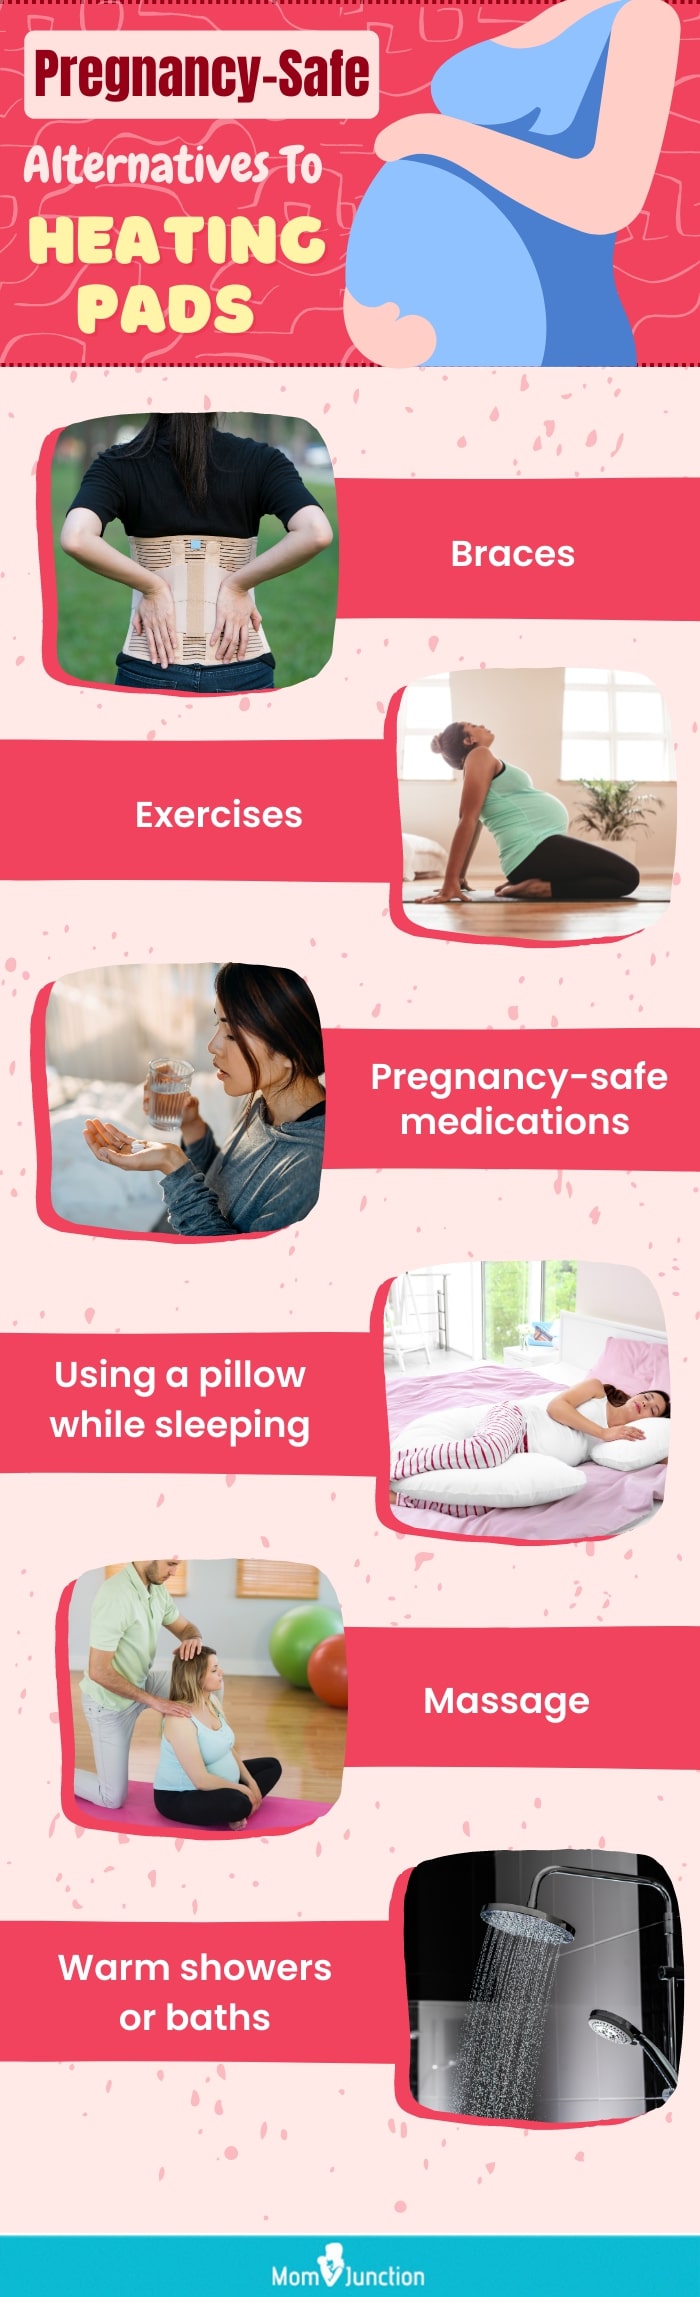 relieving pain during pregnancy without heating pads (infographic)